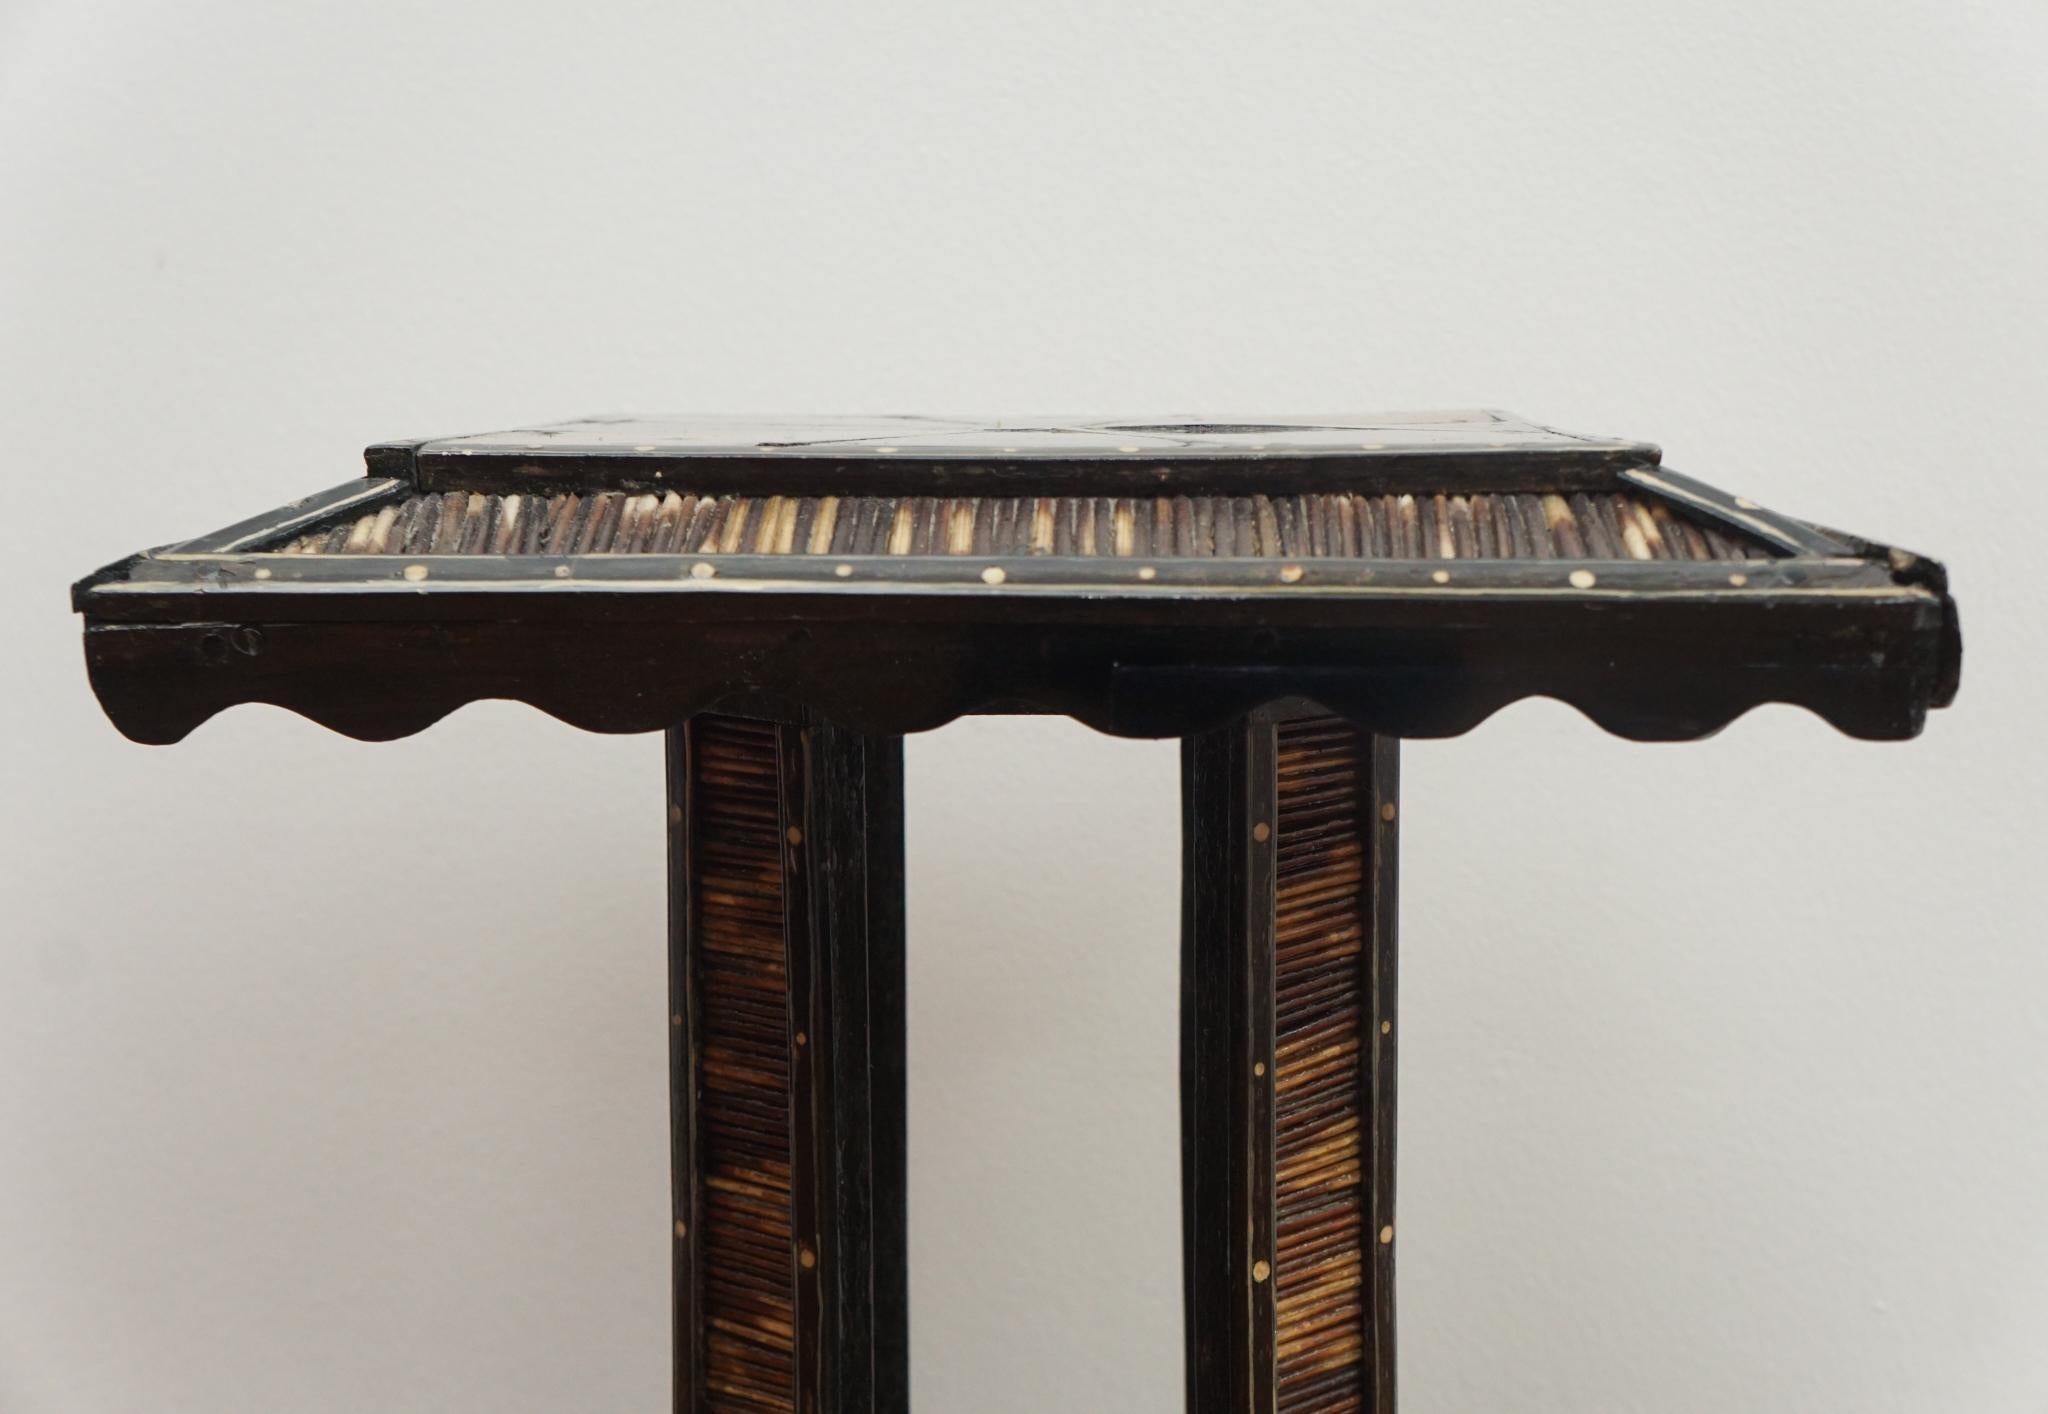 19th Century Anglo-Indian Accent Table with Ebony and Quill Detailing